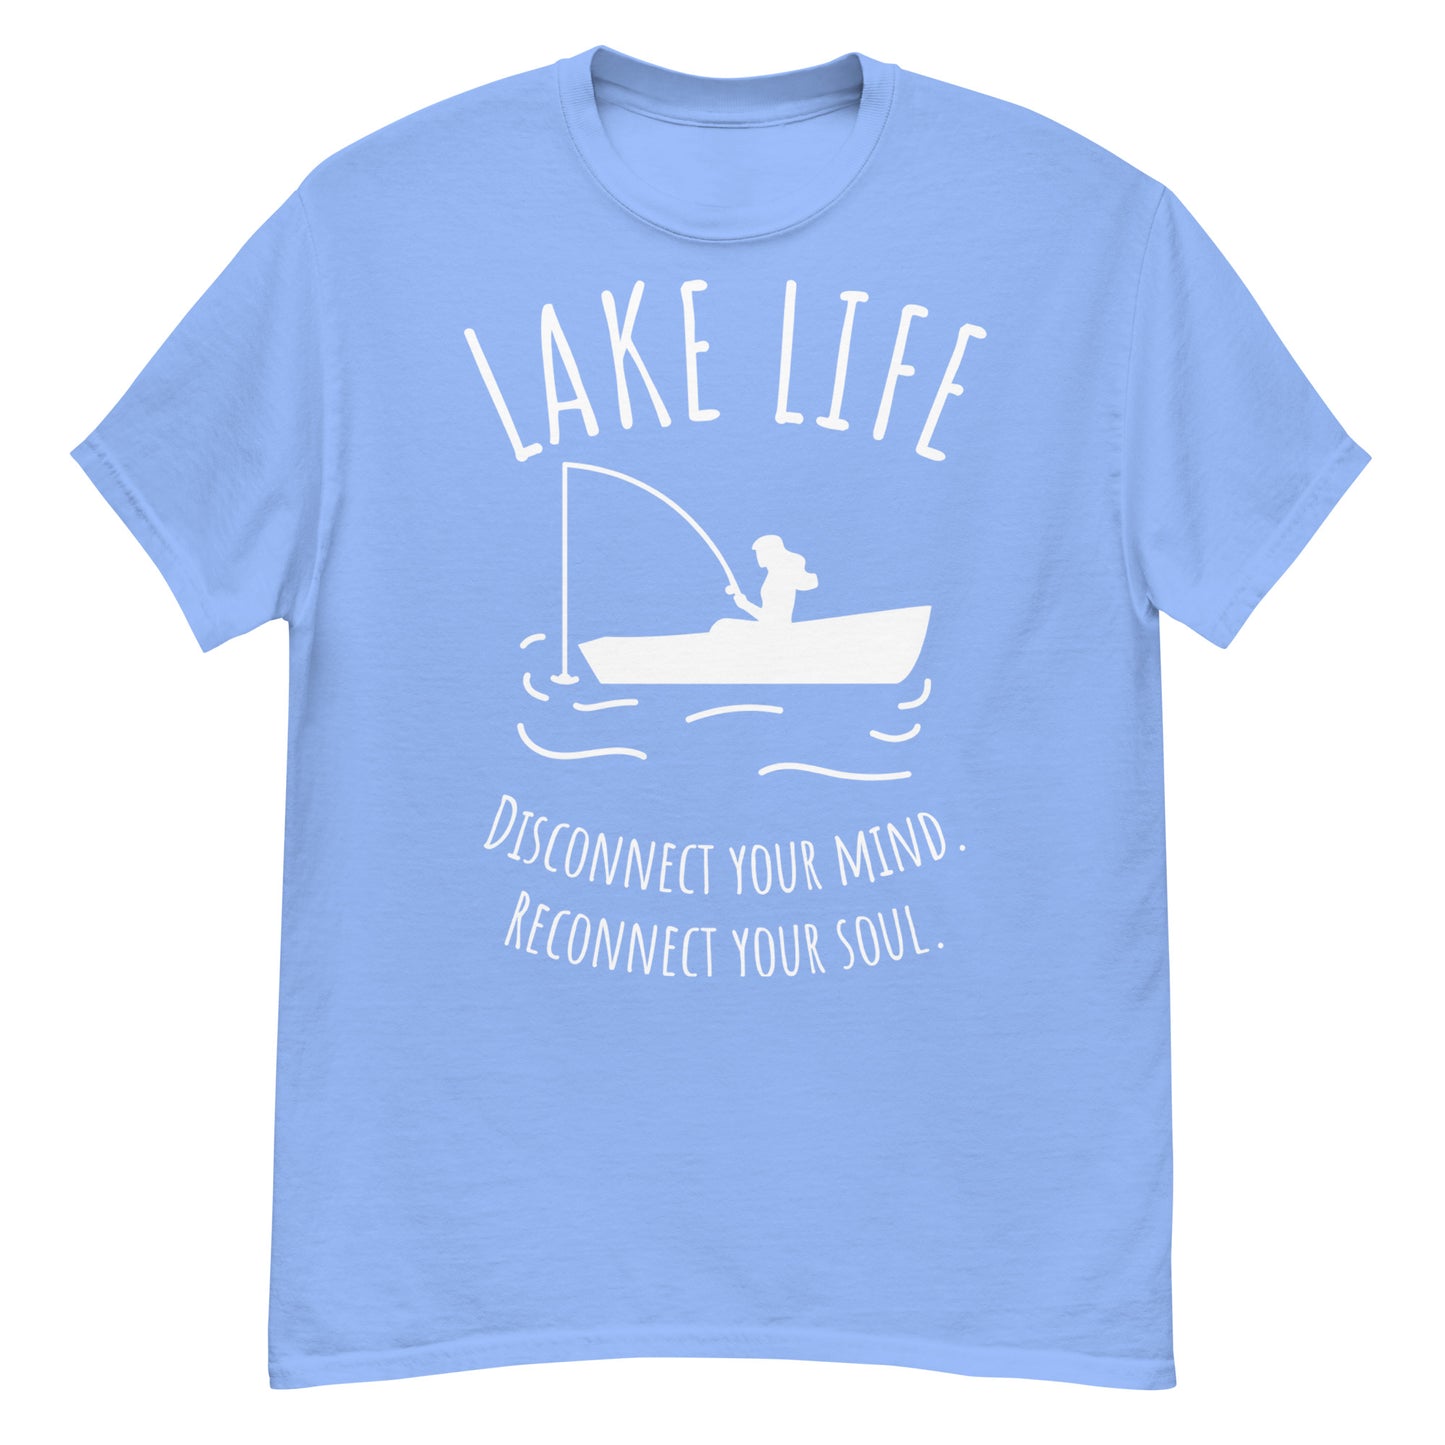 Lake Life - Disconnect your mind, reconnect your soul t-shirt